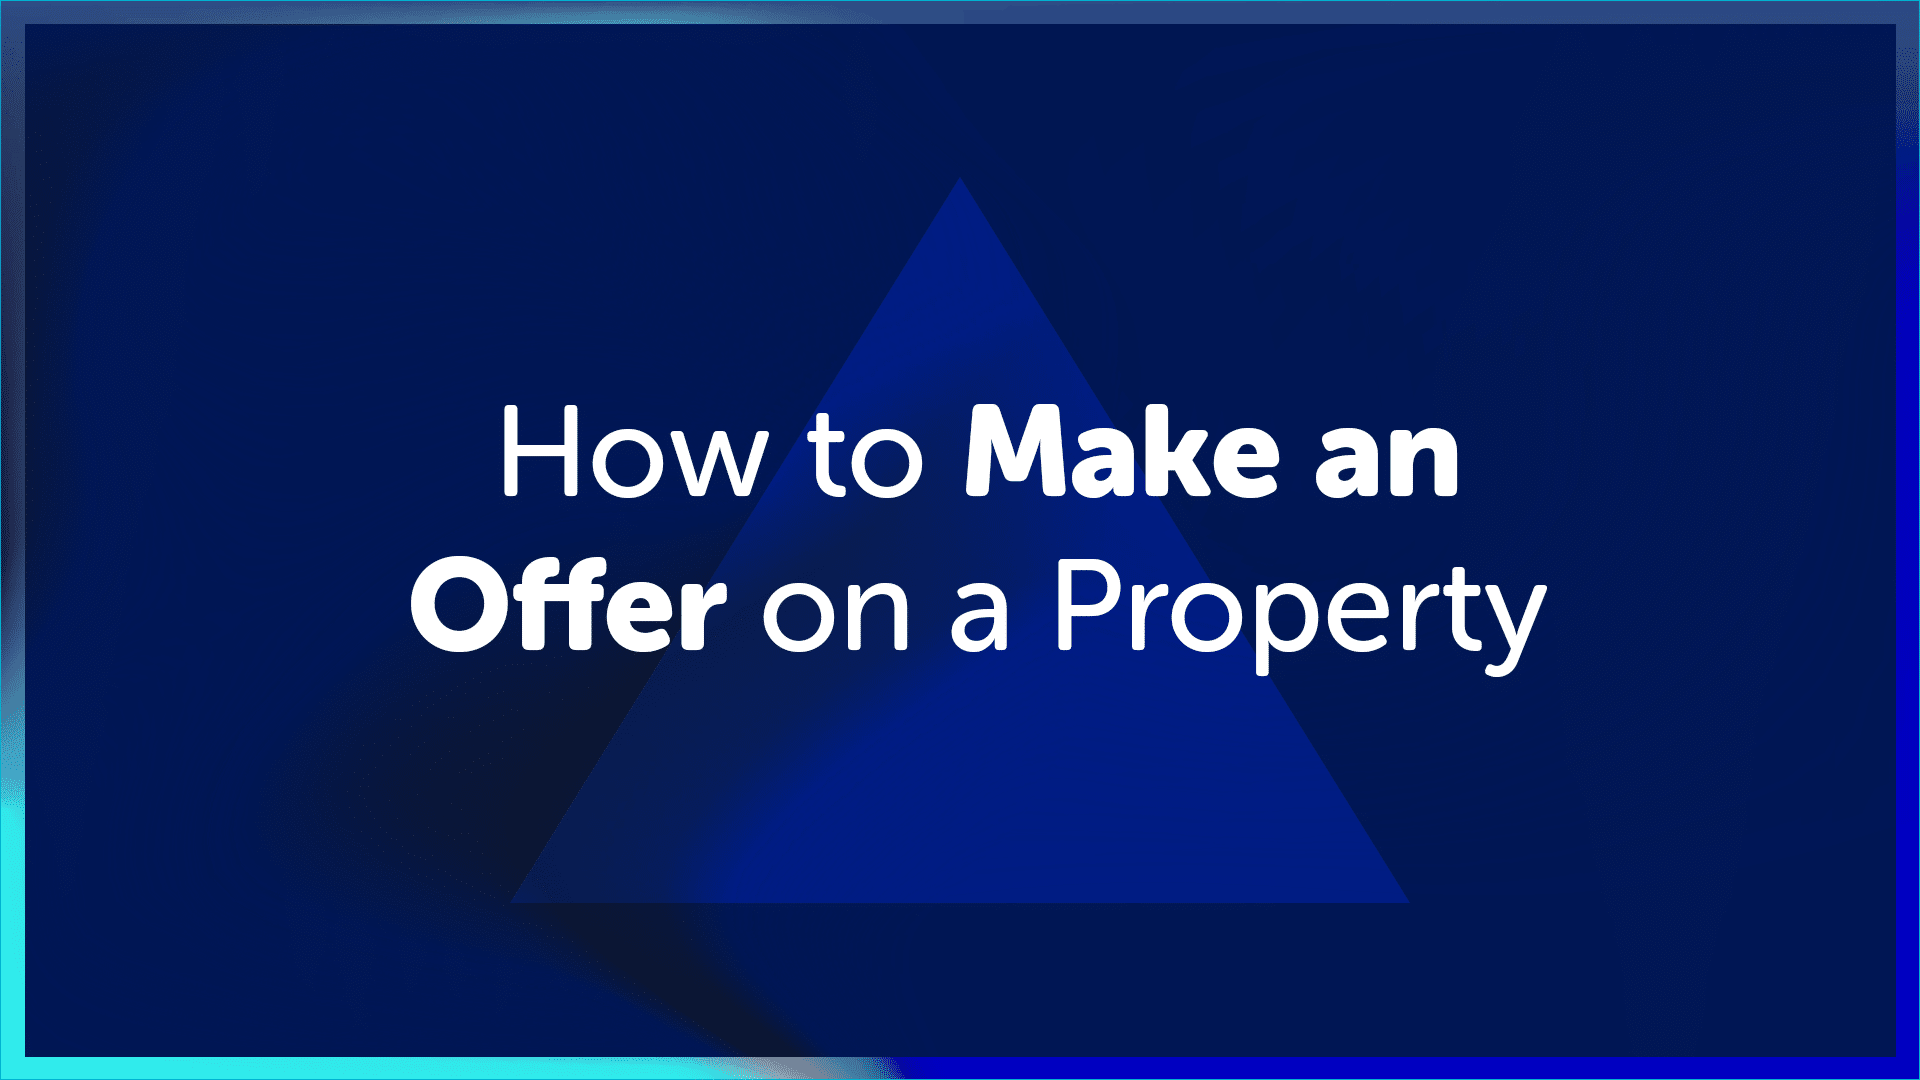 How to make an offer on a property in London | Londonmoneyman